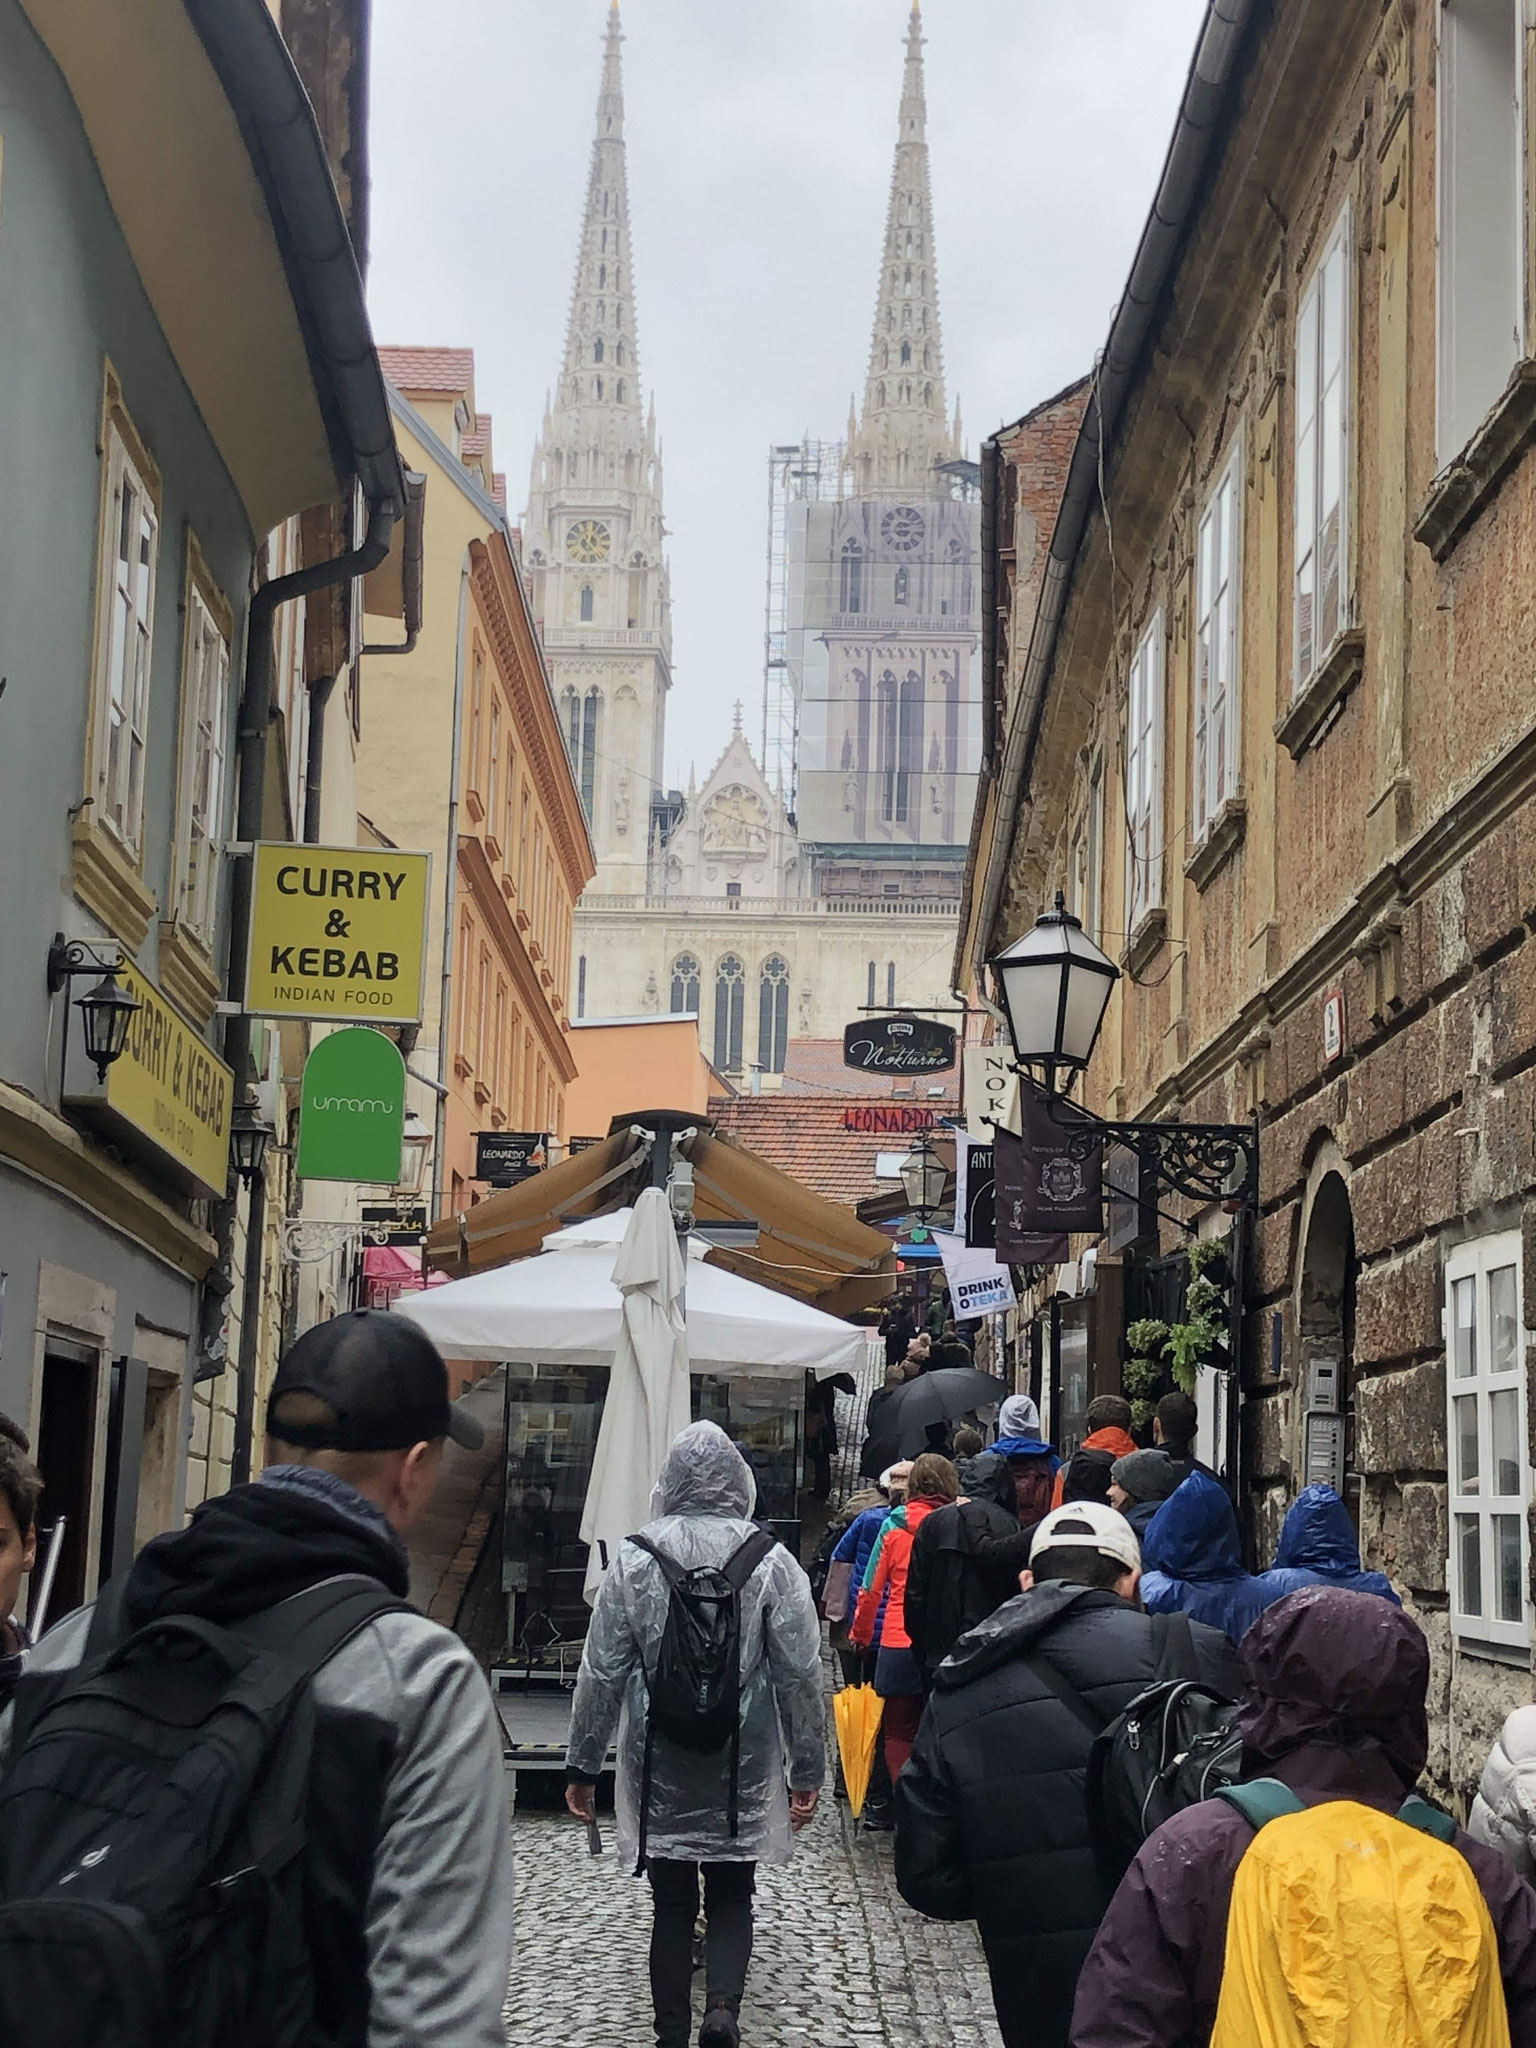 Then a rainy Zagreb walking tour, but still great.